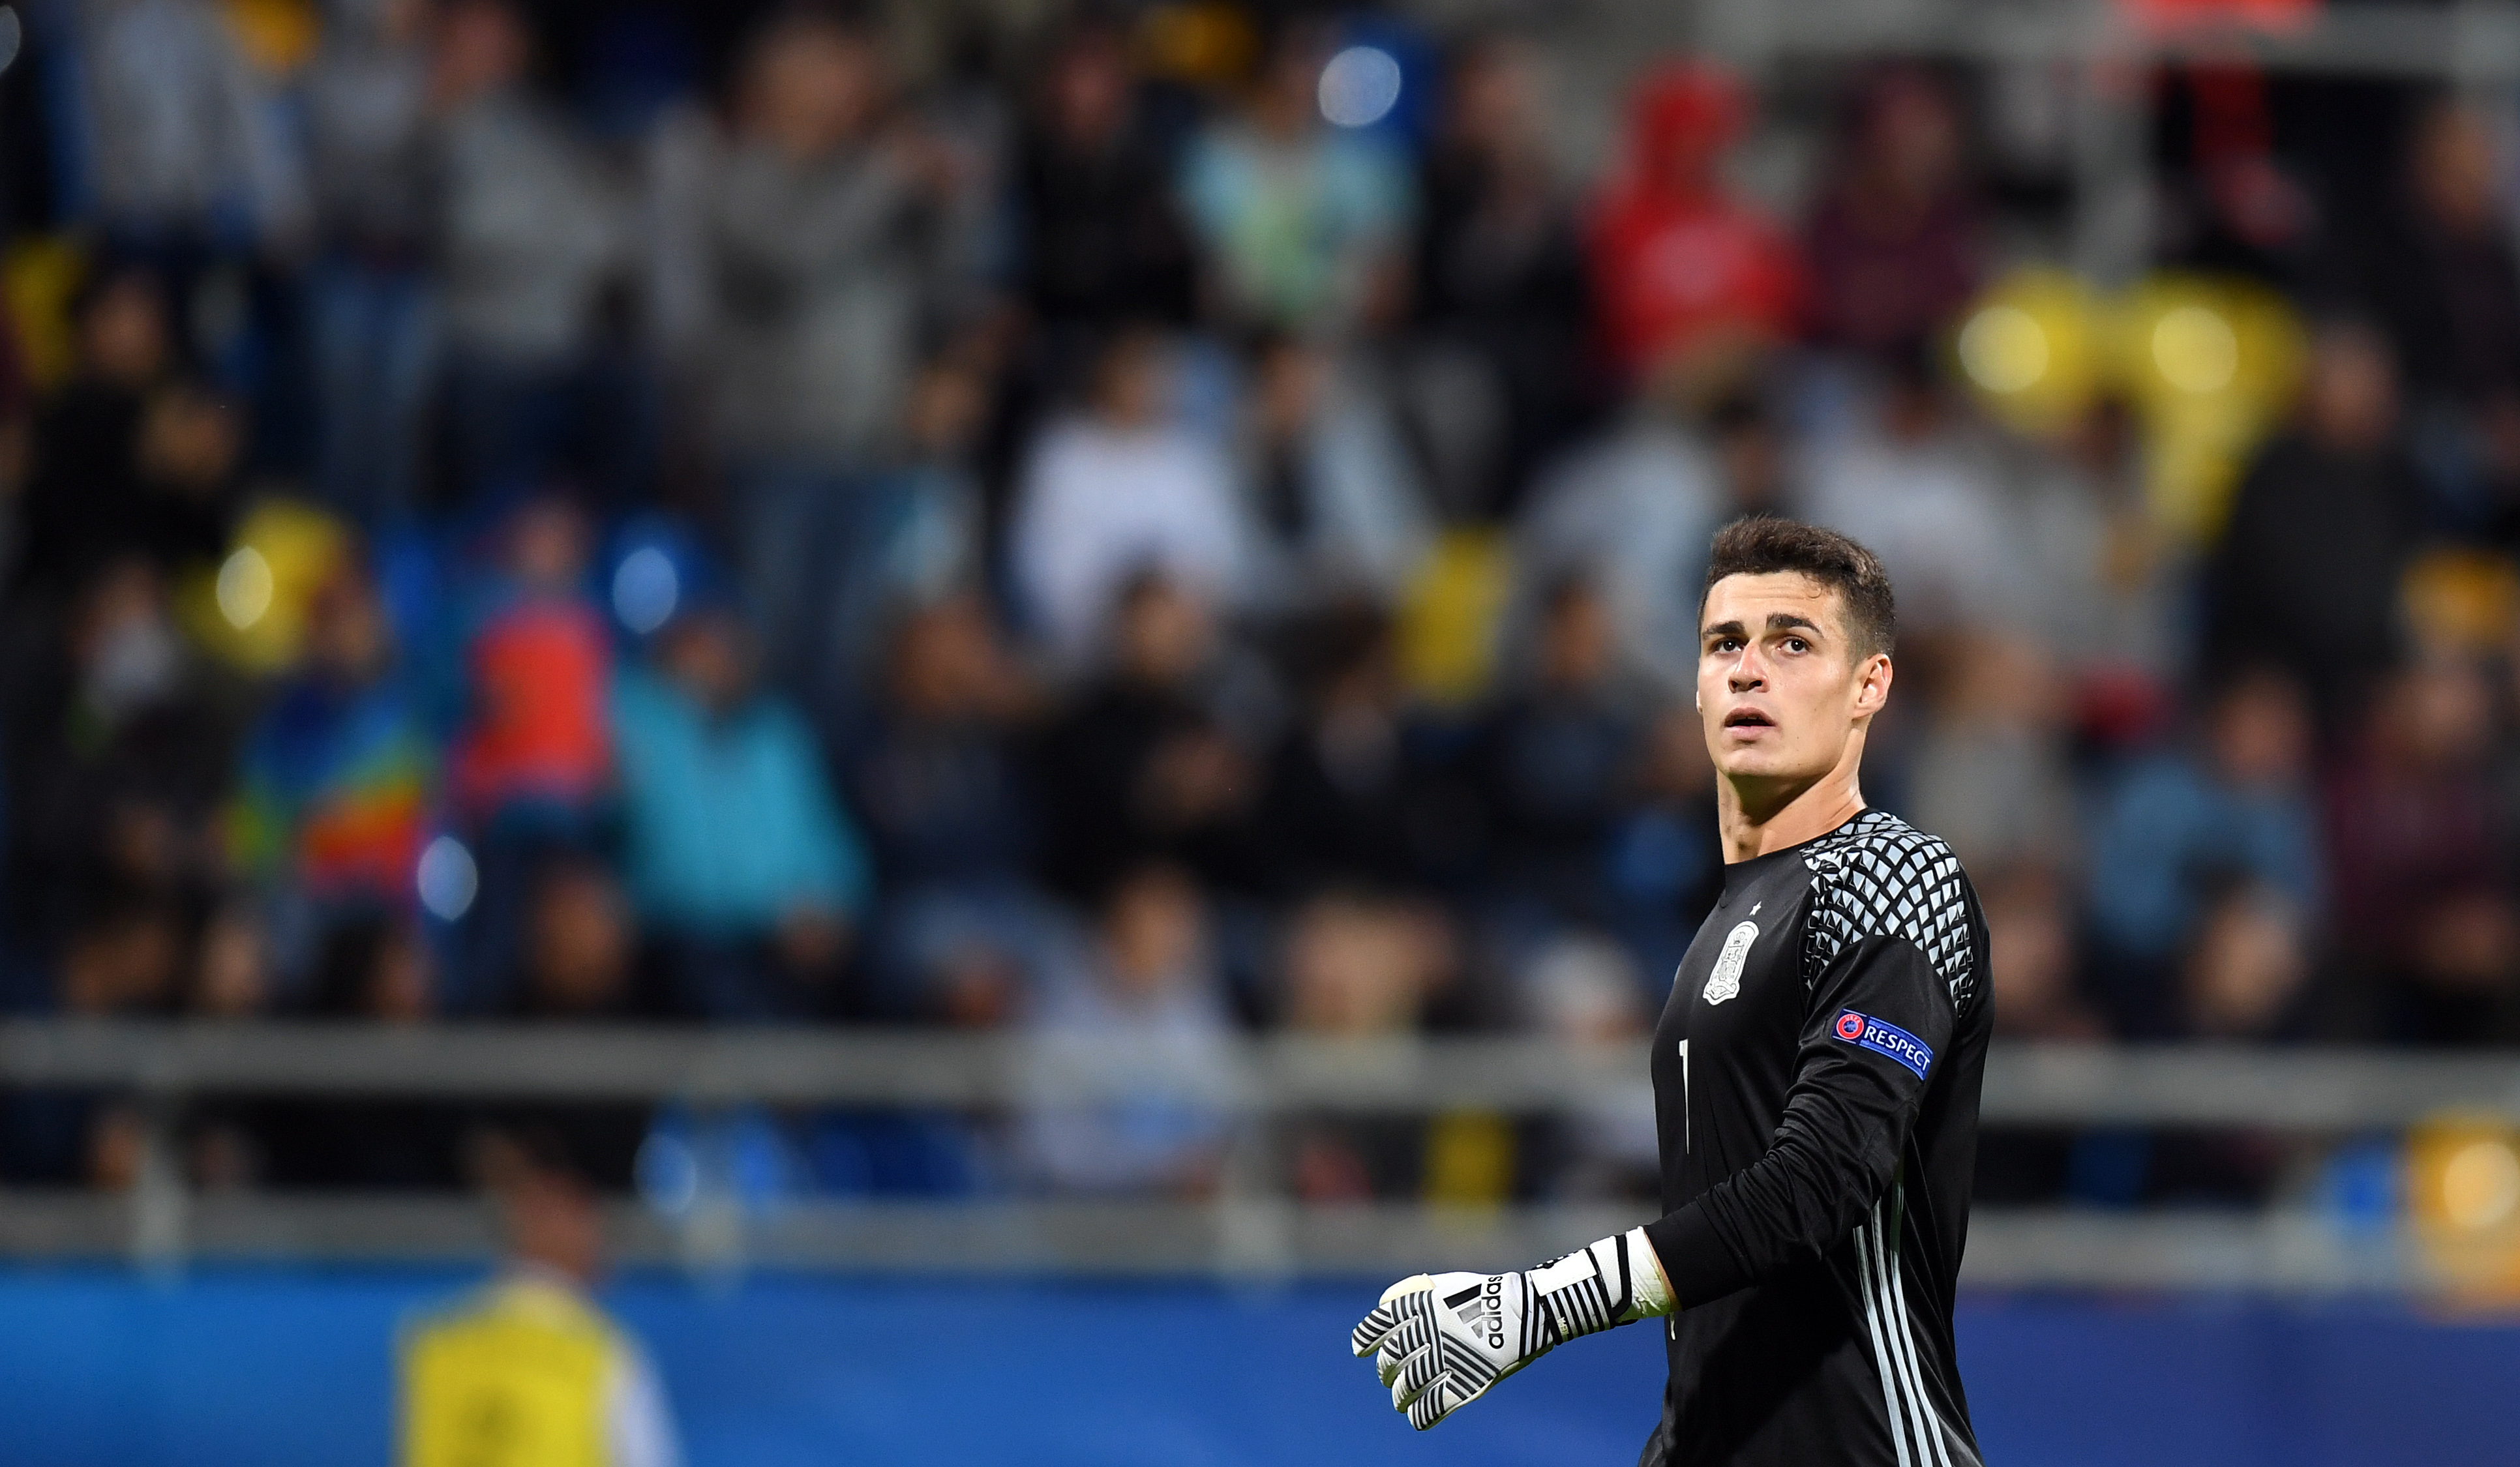 Spain's goalkeeper Kepa Arrizabalaga Revuelta is pictured during the UEFA U-21 European Championship Group B football match Spain v Portugal in Gdynia, on June 20, 2017.   / AFP PHOTO / Maciej GILLERT        (Photo credit should read MACIEJ GILLERT/AFP/Getty Images)